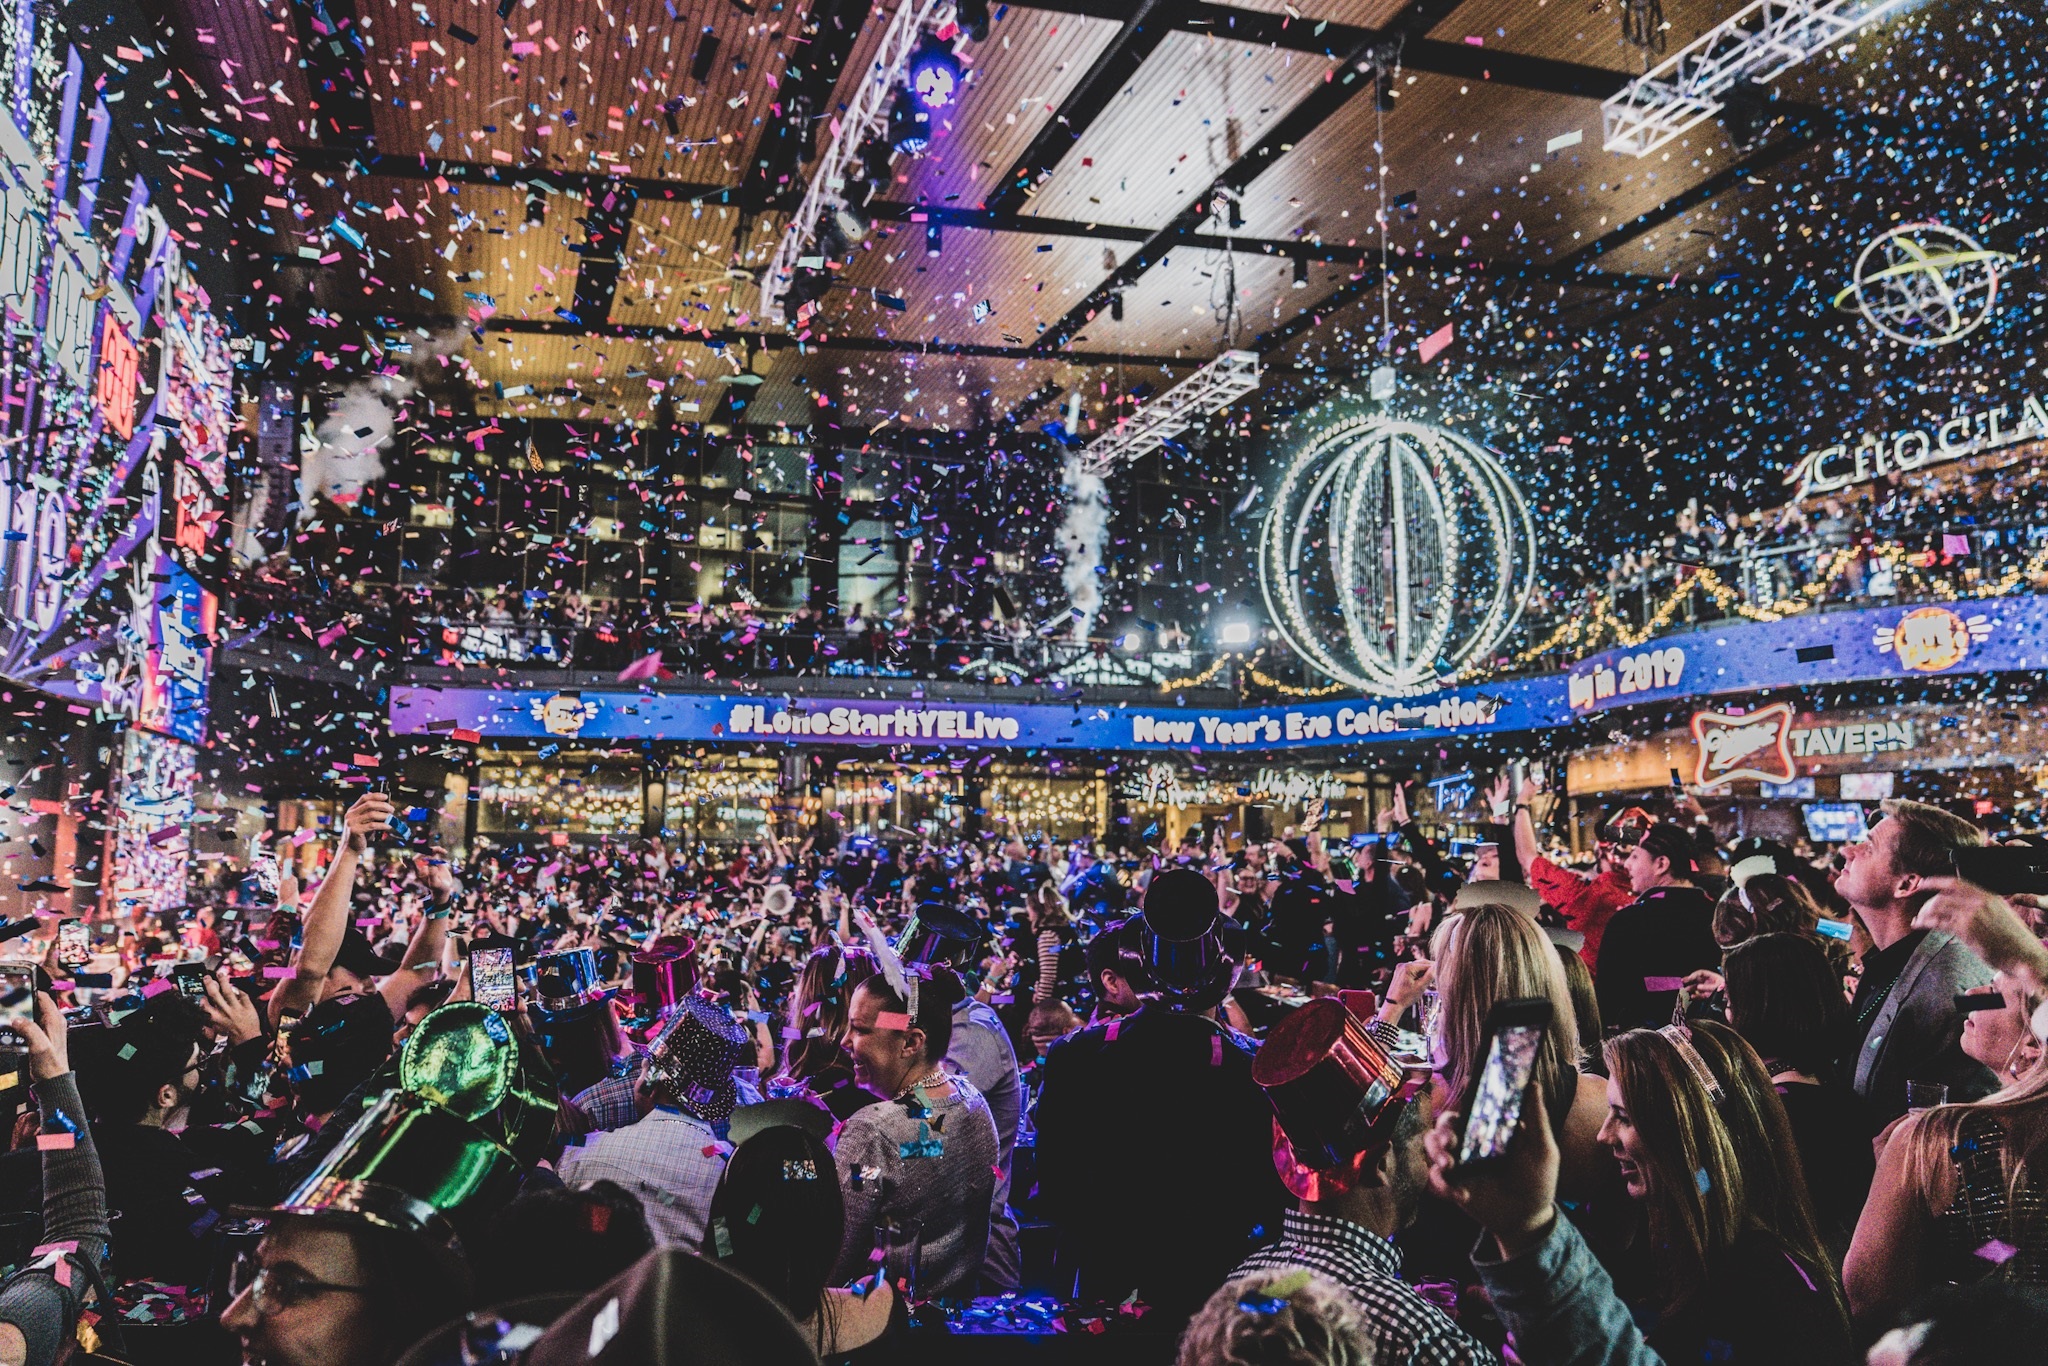 Photo of Texas Live! New Year's Eve Party with confetti and New Years Eve ball drop